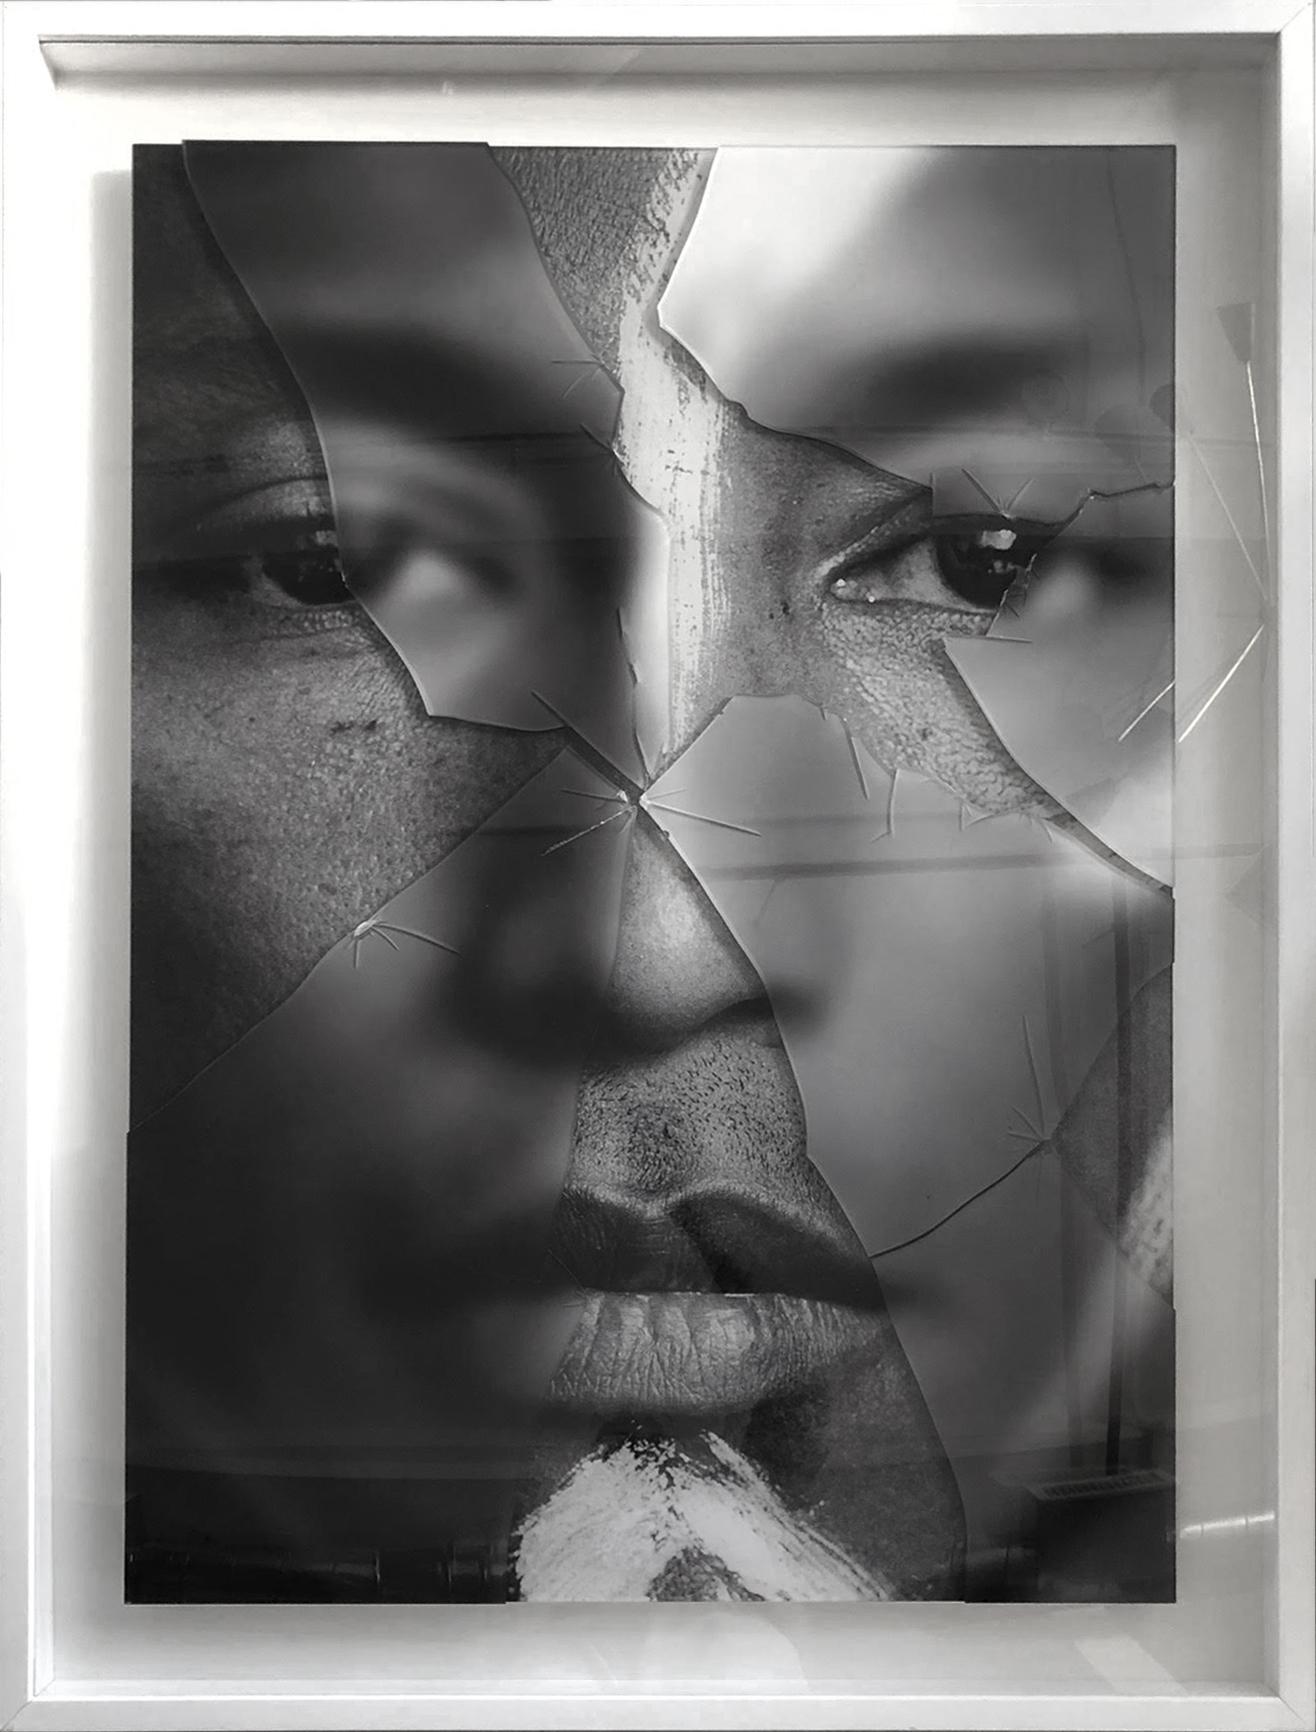 Pharrell Williams 3 and 4, Portraits, Intervened by the artists - Photograph by Hunter & Gatti